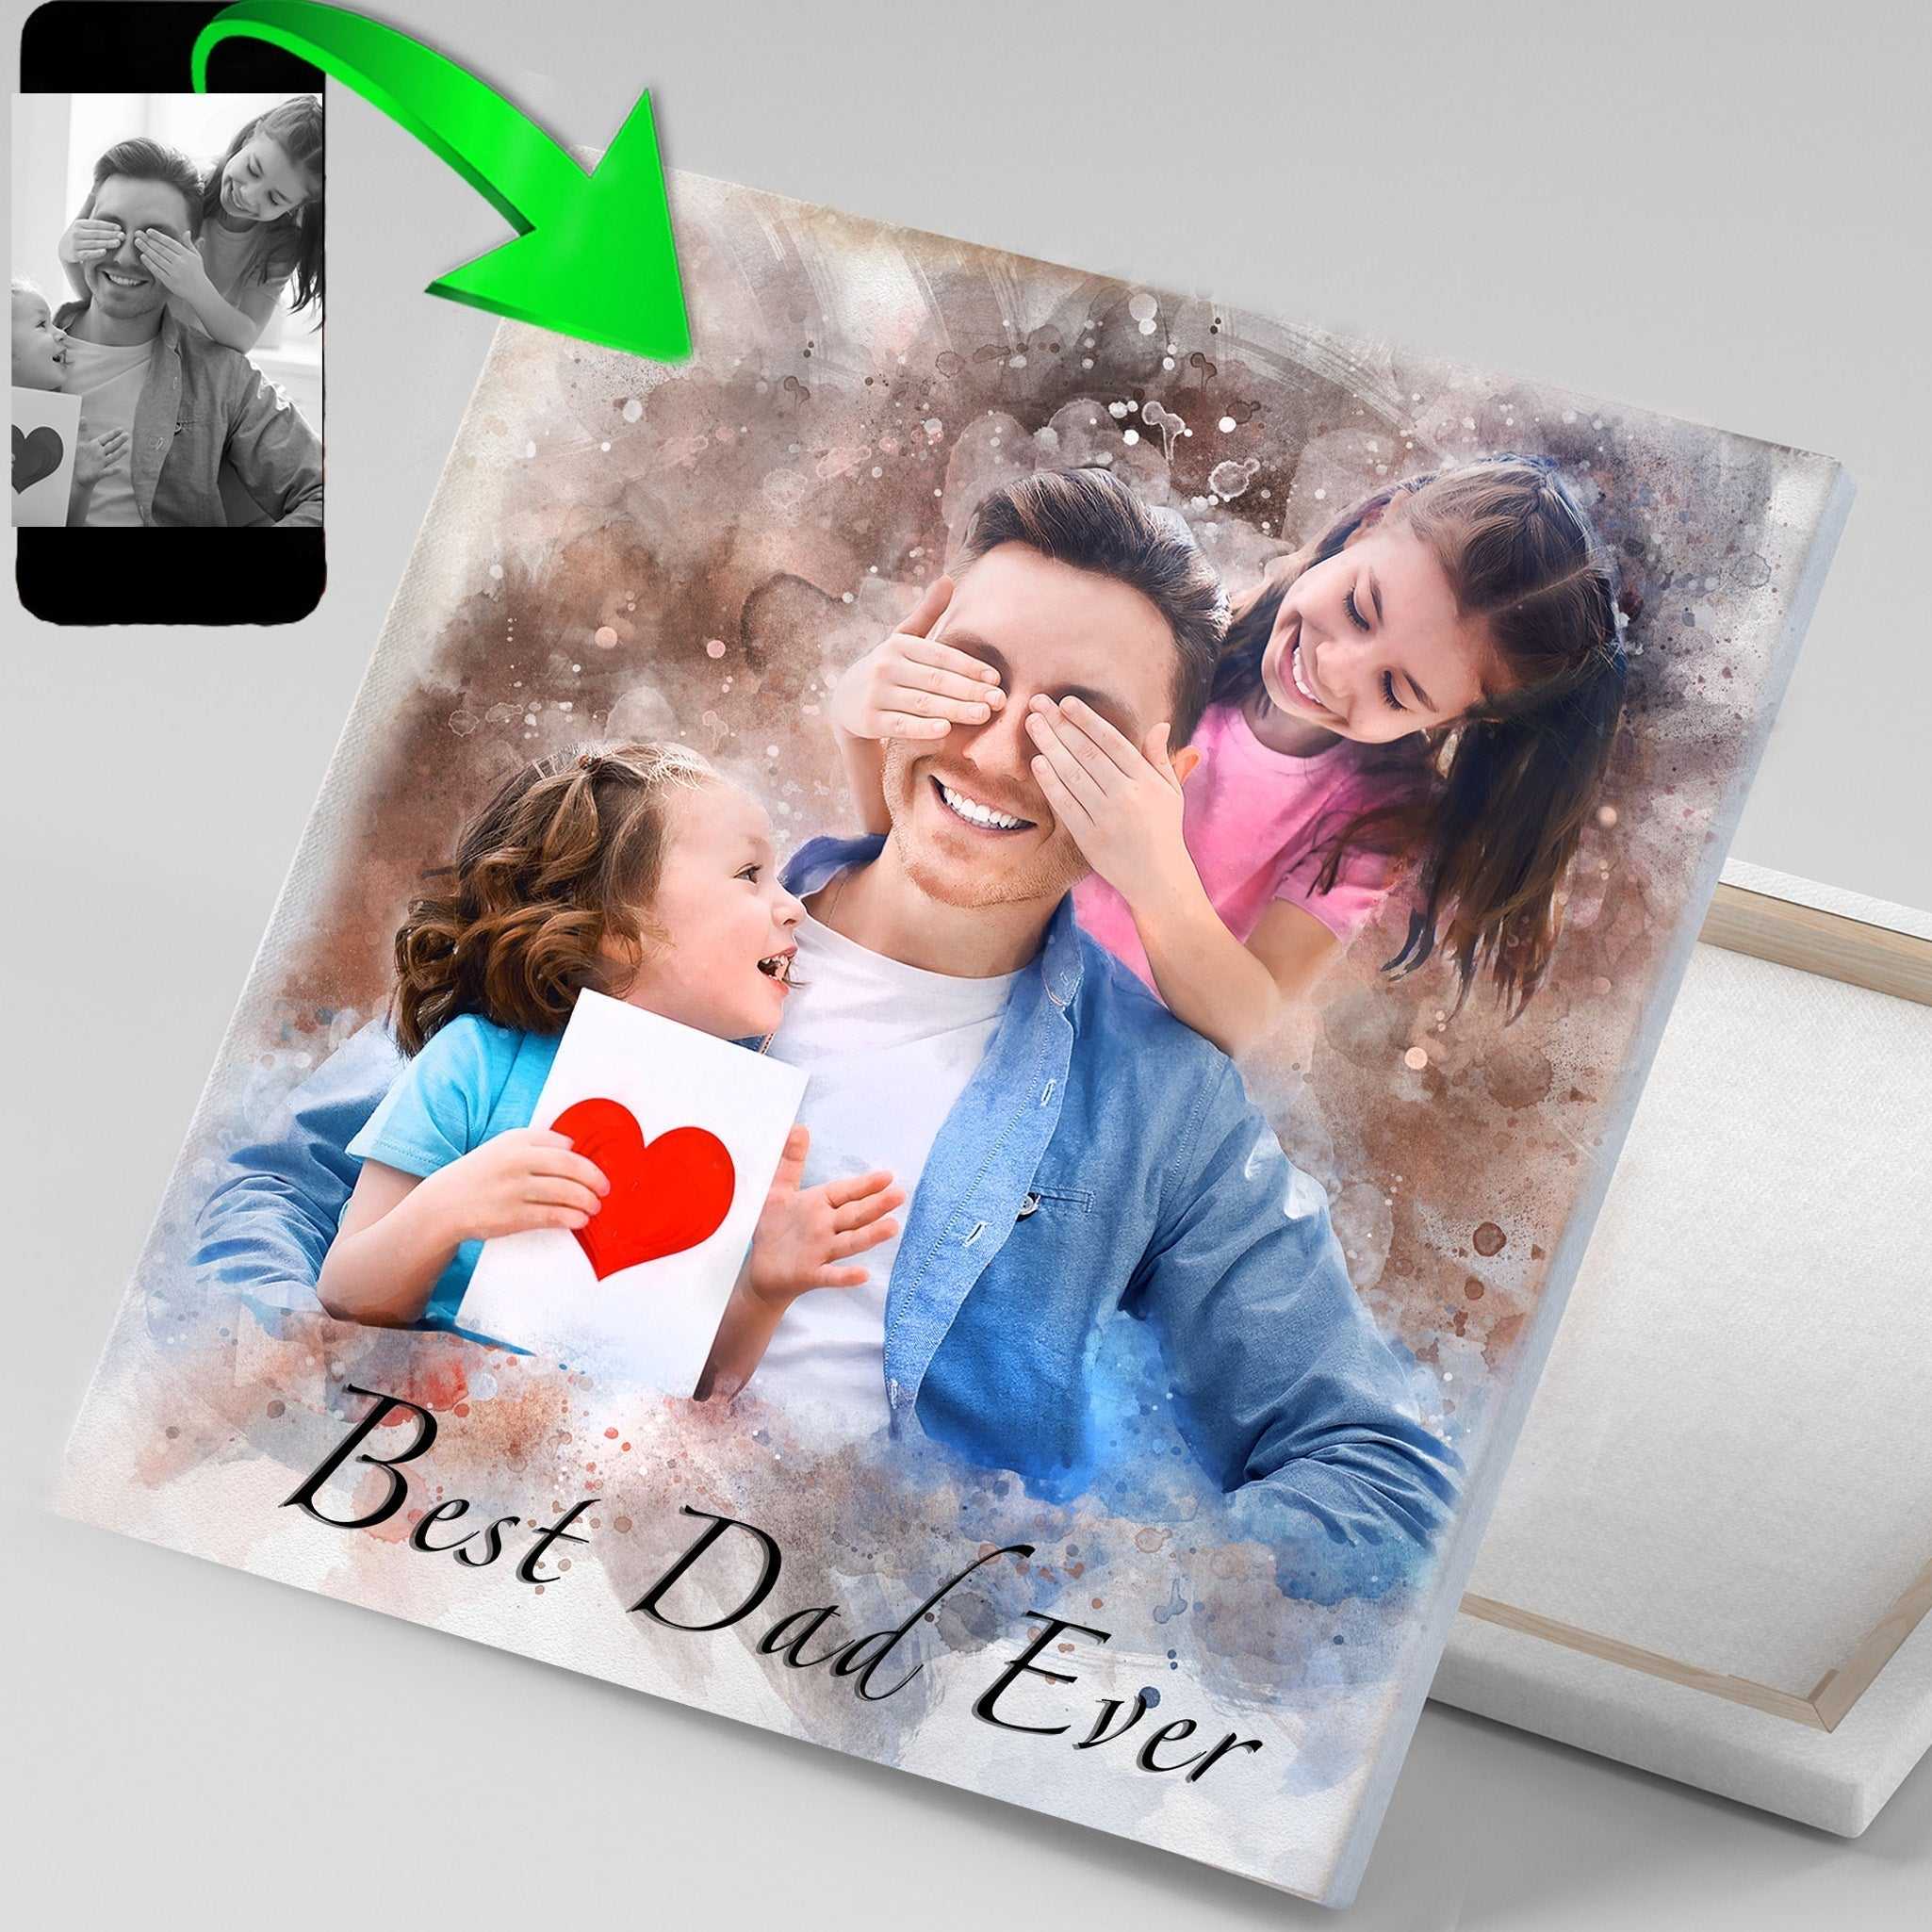 Photo Gifts & Cards Online - Send Father's Day Gifts to India, USA, UK |  IGP.com